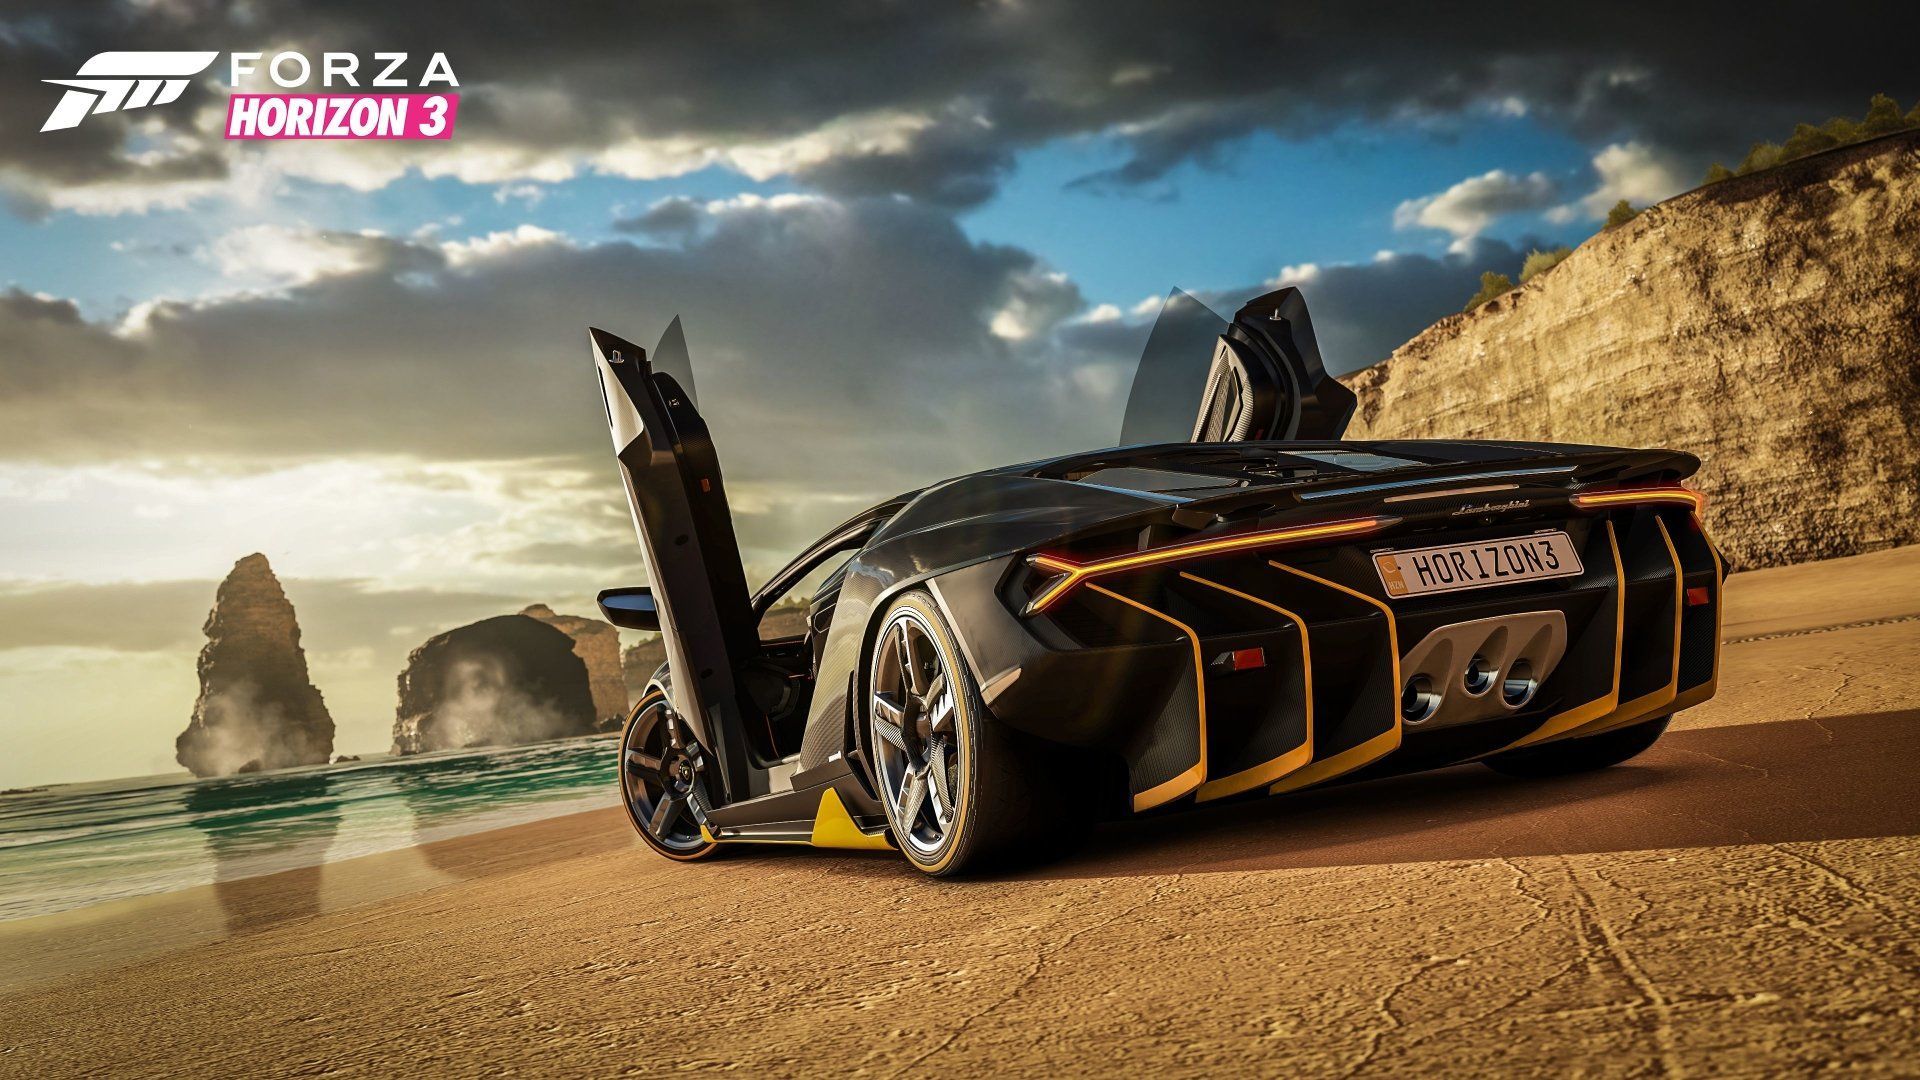 140 Forza Horizon 5 HD Wallpapers and Backgrounds